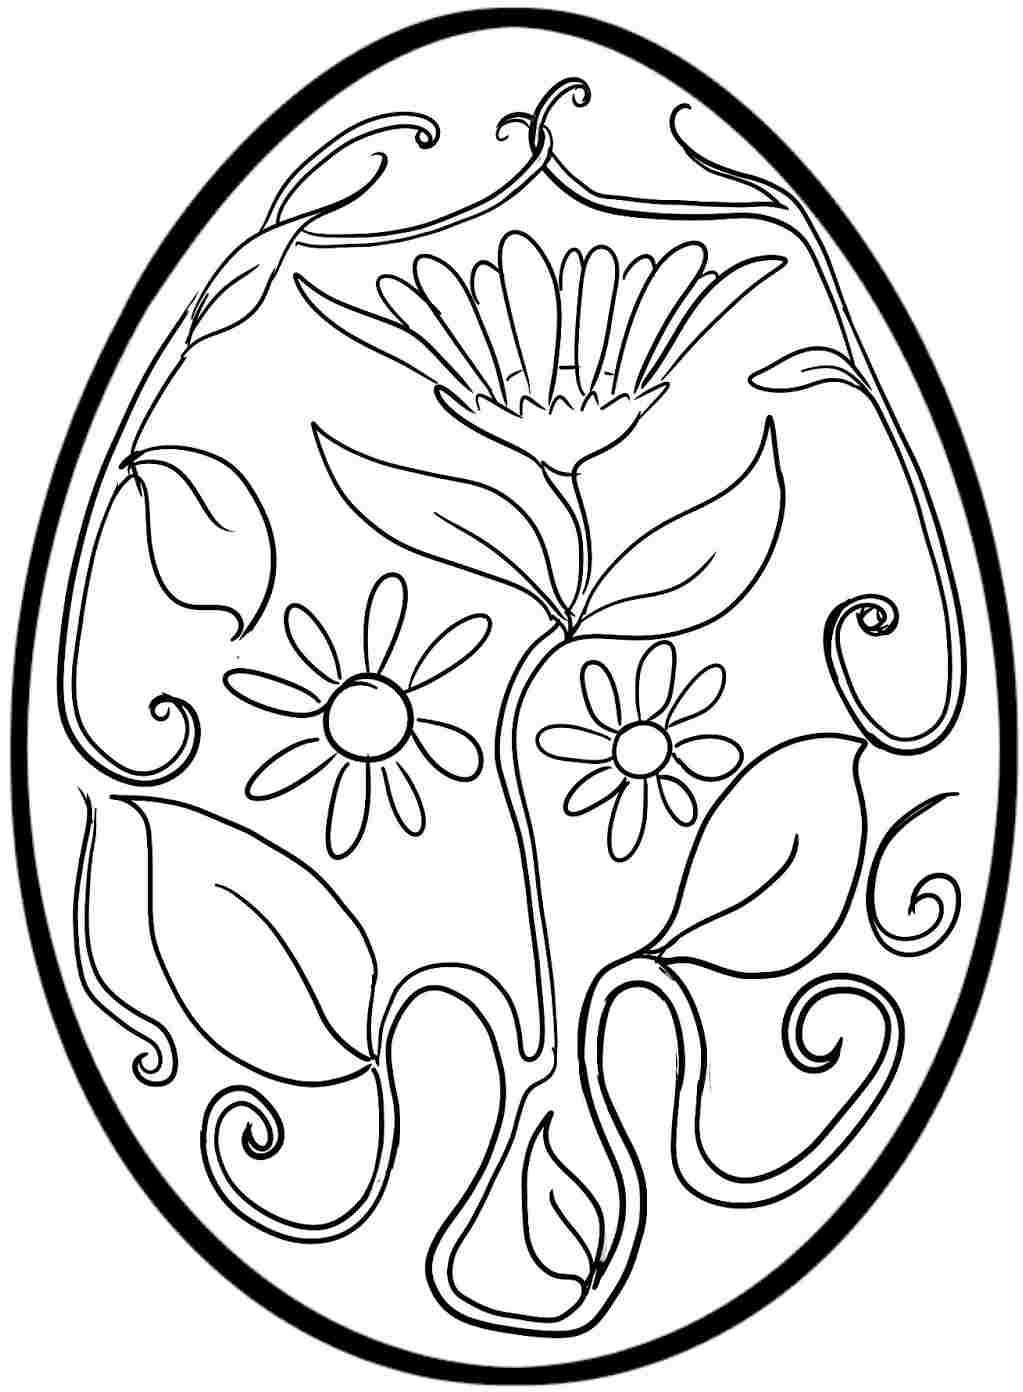 Easter Egg With Flowers For Adult Coloring Page